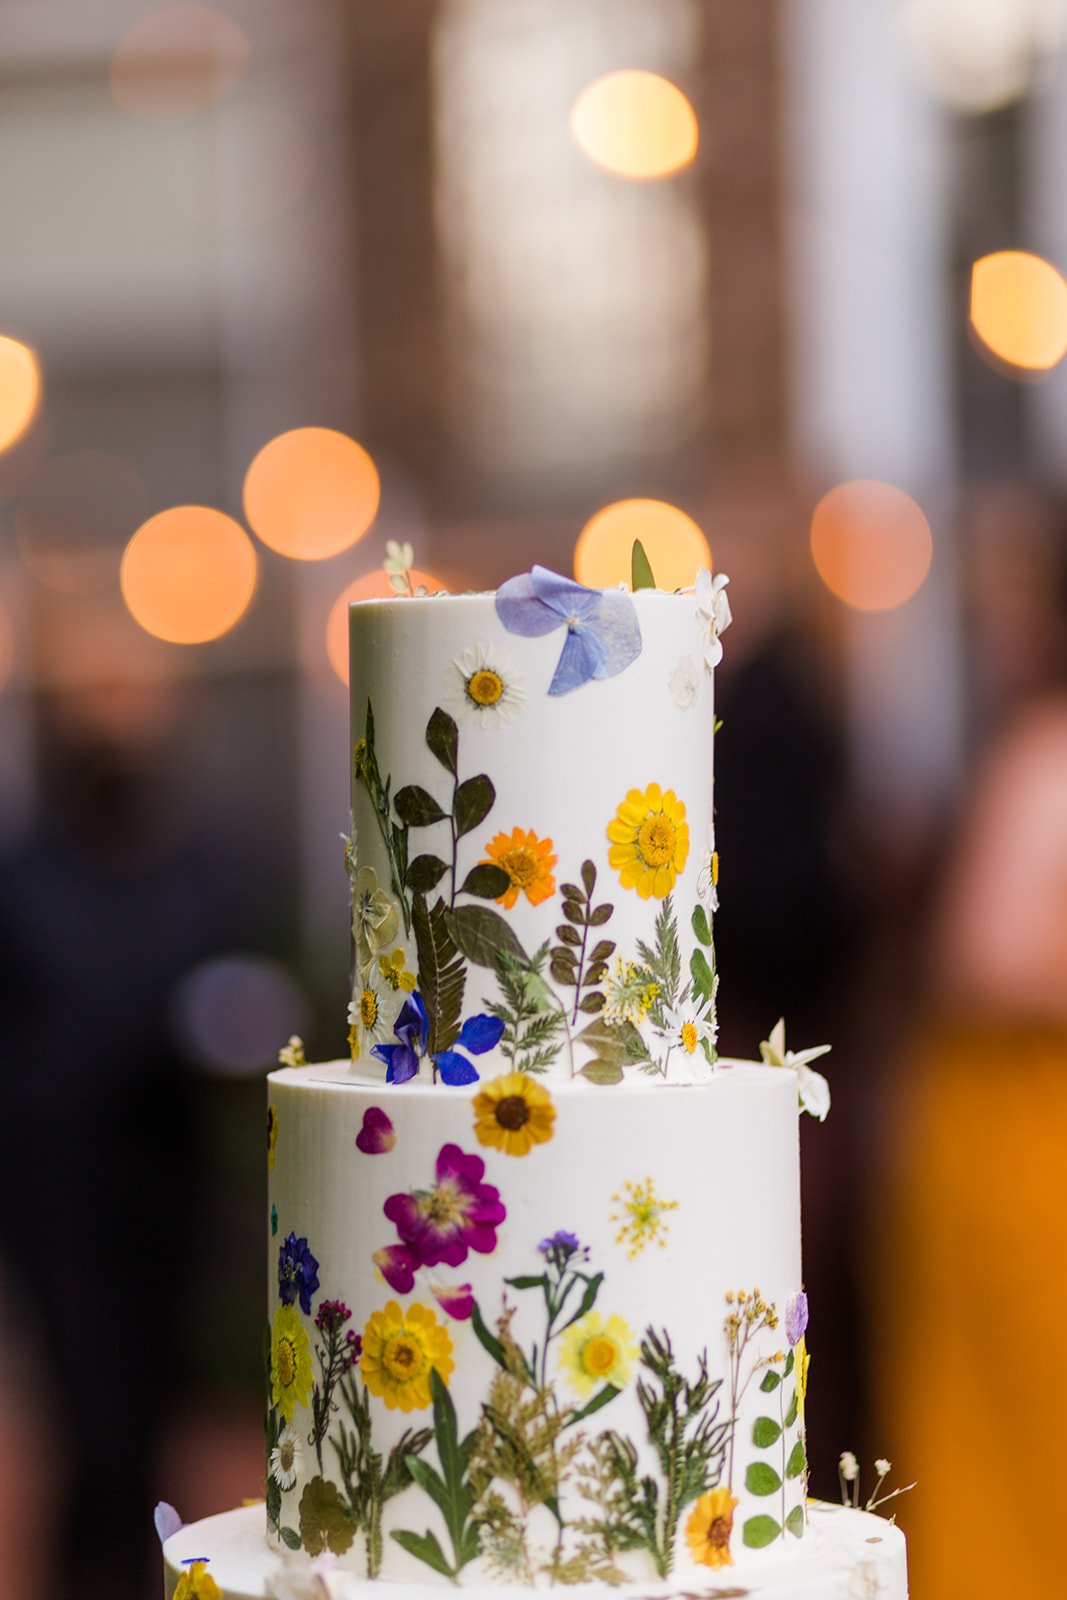 Flower Power - Pressed Flower Cakes Are All The Rage! — CHI thee WED